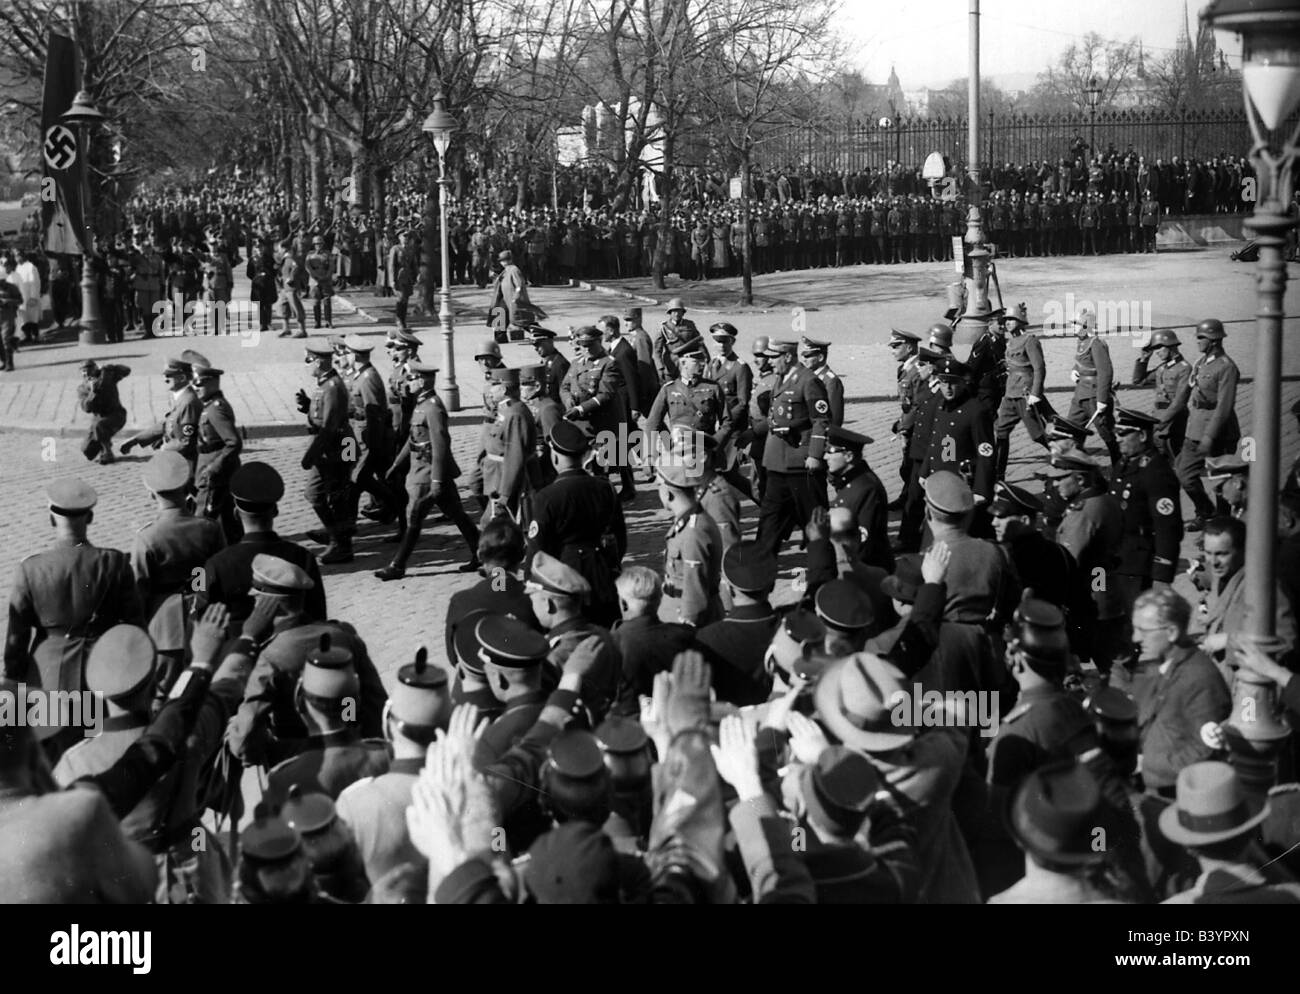 Nazism / National Socialism, politics, annexation of Austria 1938, Adolf Hitler going to the military parade, Heldenplatz, Vienna, 15.3.1938,  Nazi Germany, Third Reich, Anschluss, occupation, officers, Wehrmacht, Bundesheer, 20th century, historic, historical, people, 1930s, Stock Photo